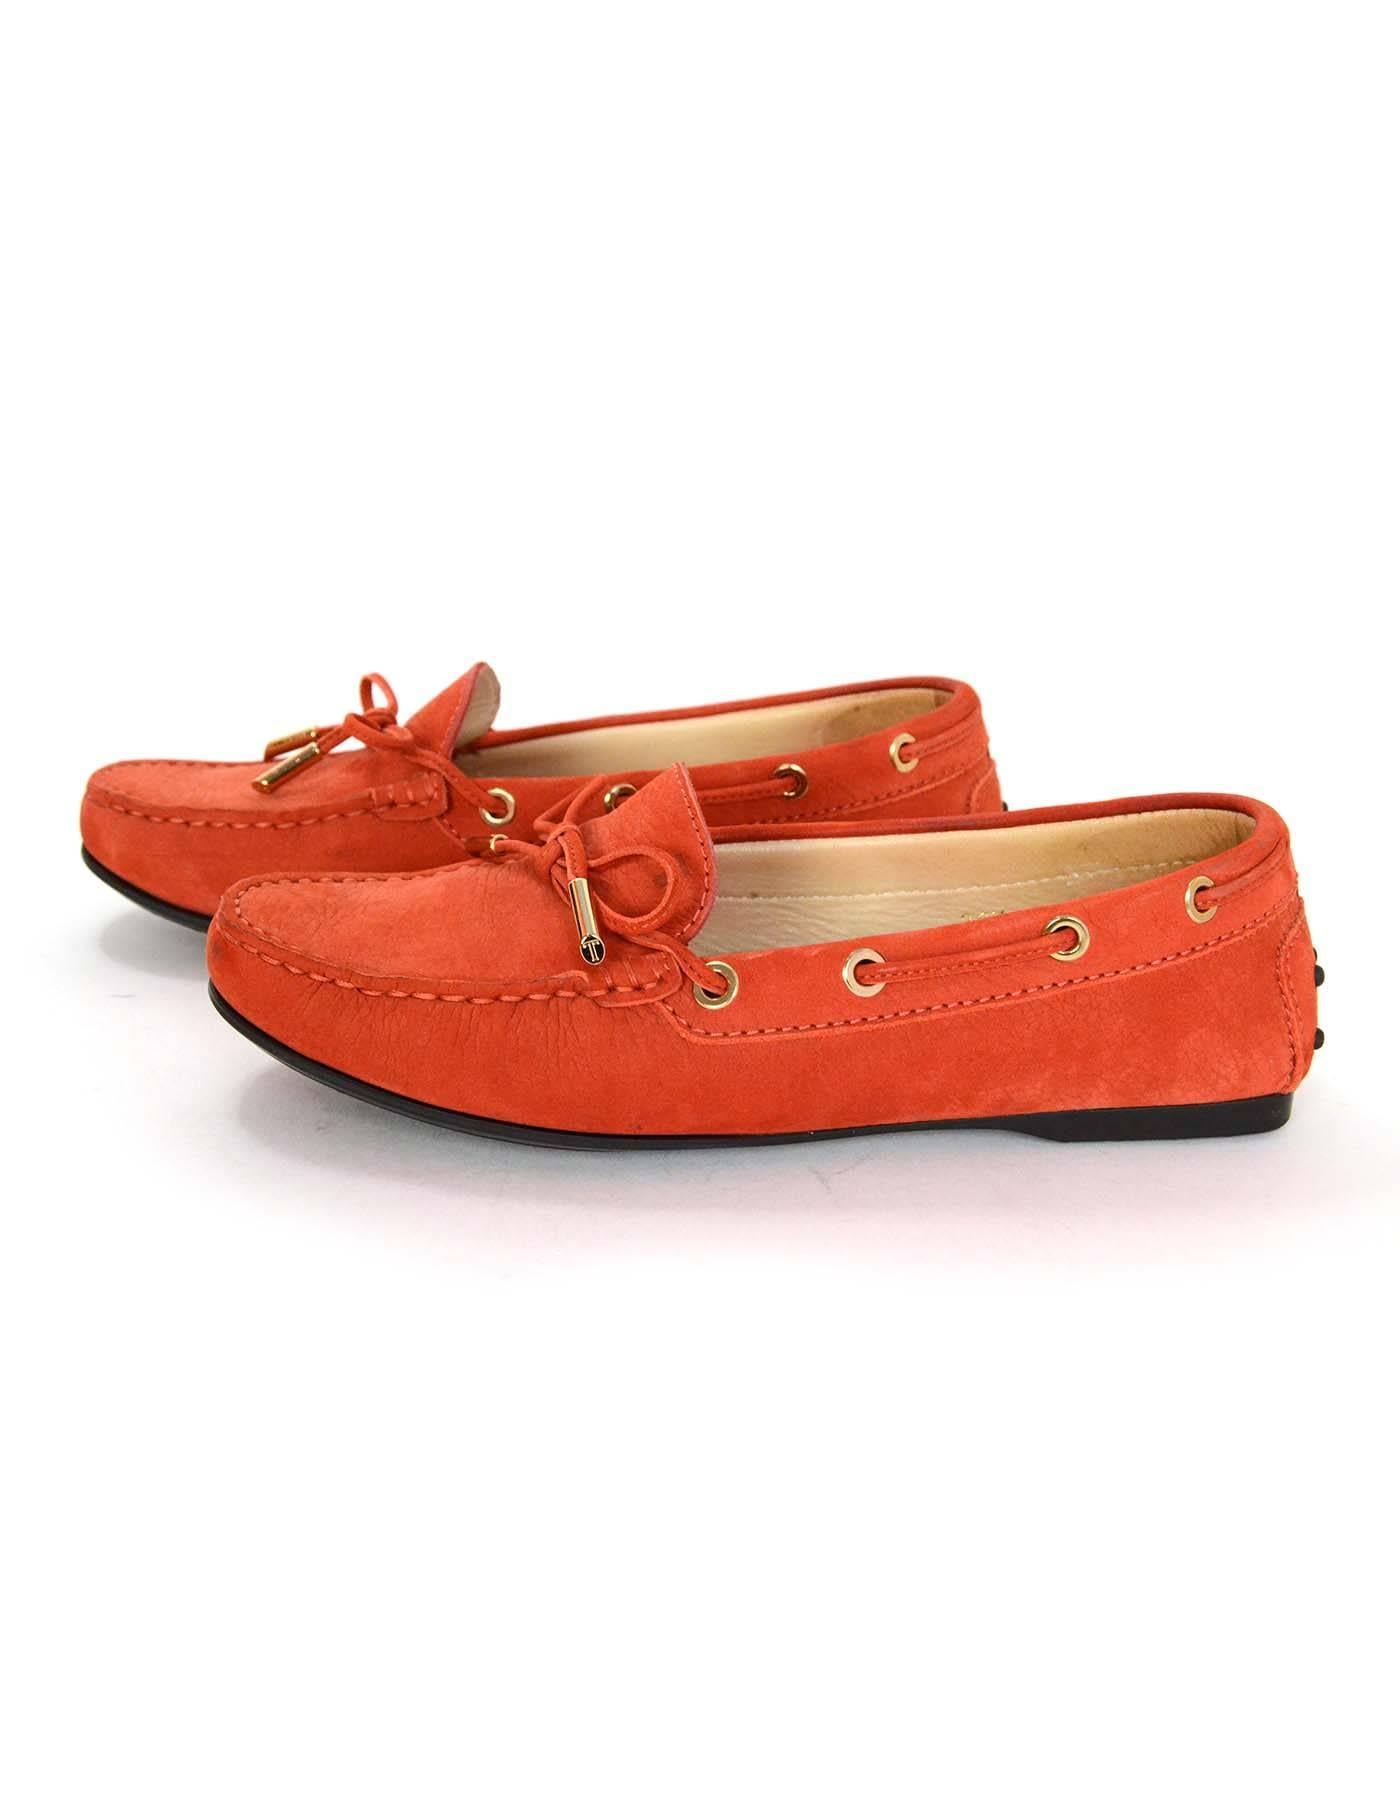 Tod's Orange Suede Riding Loafers Sz 36.5

Made in: Italy
Color: Orange
Materials: Leather and suede
Closure/opening: Slide on
Sole Stamp: Tod's
Overall Condition: Excellent pre-owned condition with the exception of light wear at soles and